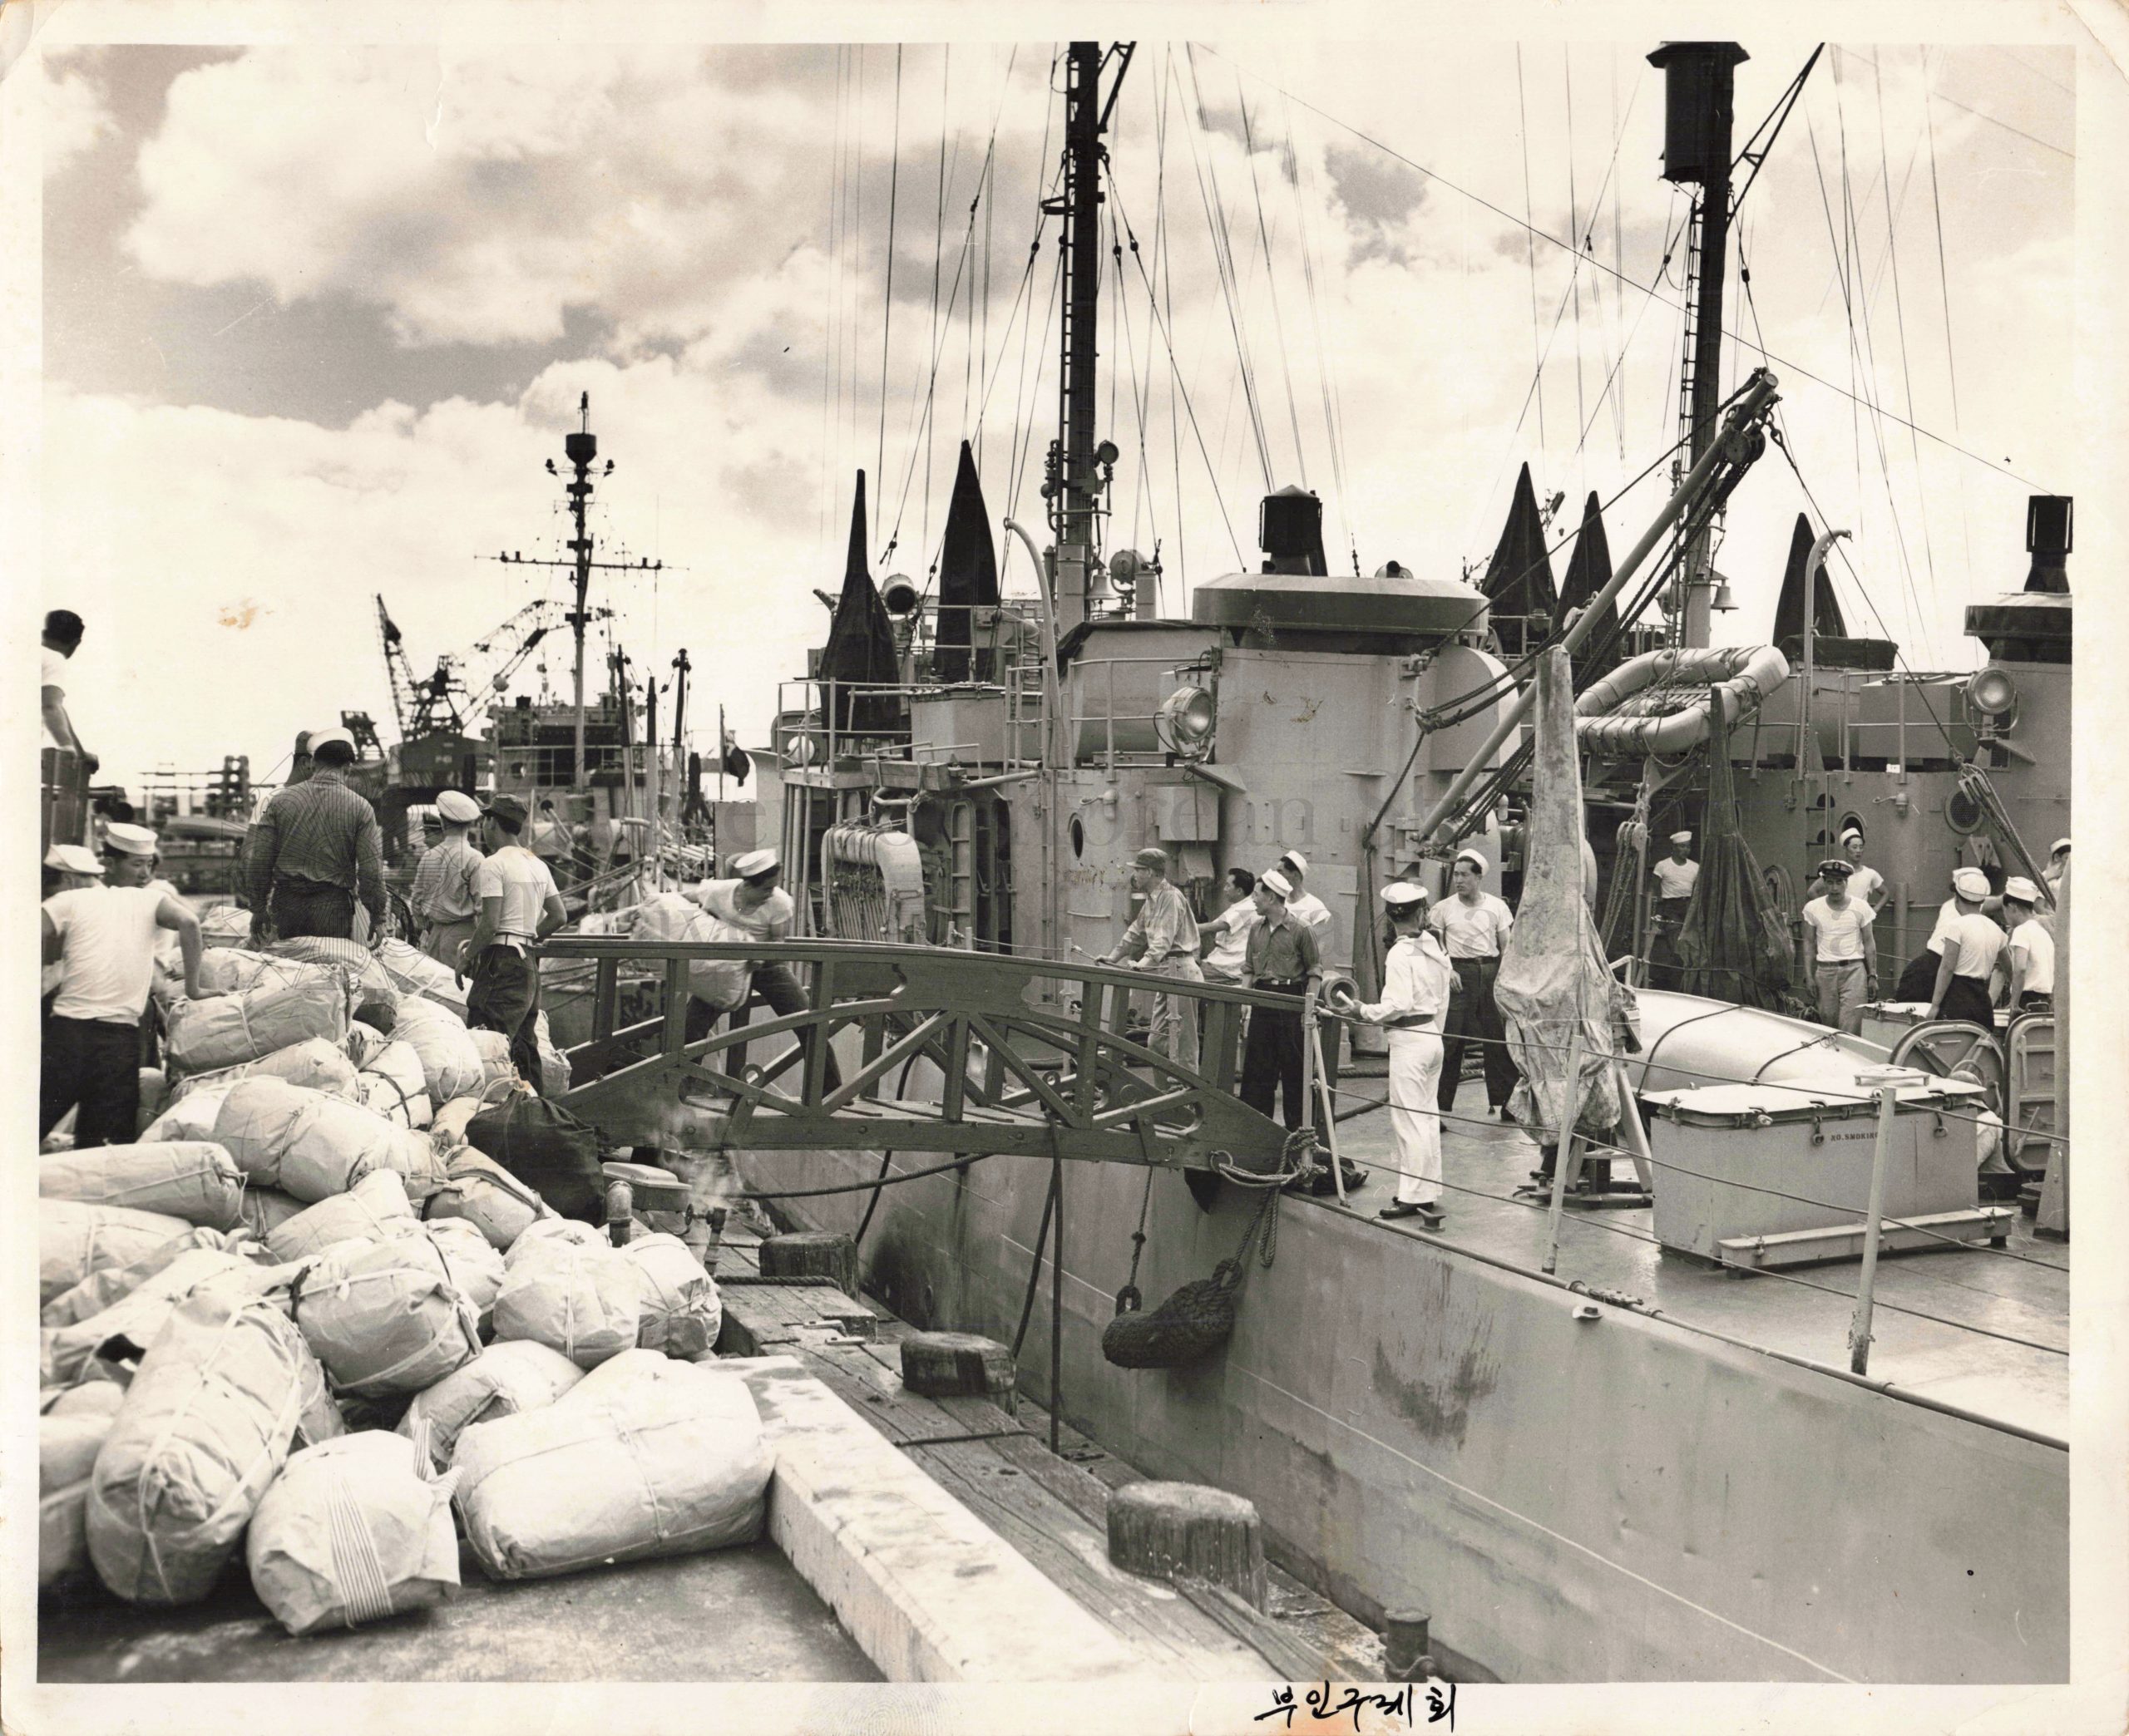 Clothing collected by KWRS are ready to be shipped on a U.S. Navy ship at Pearl Harbor, undated (Donald C.W. Kim collection)